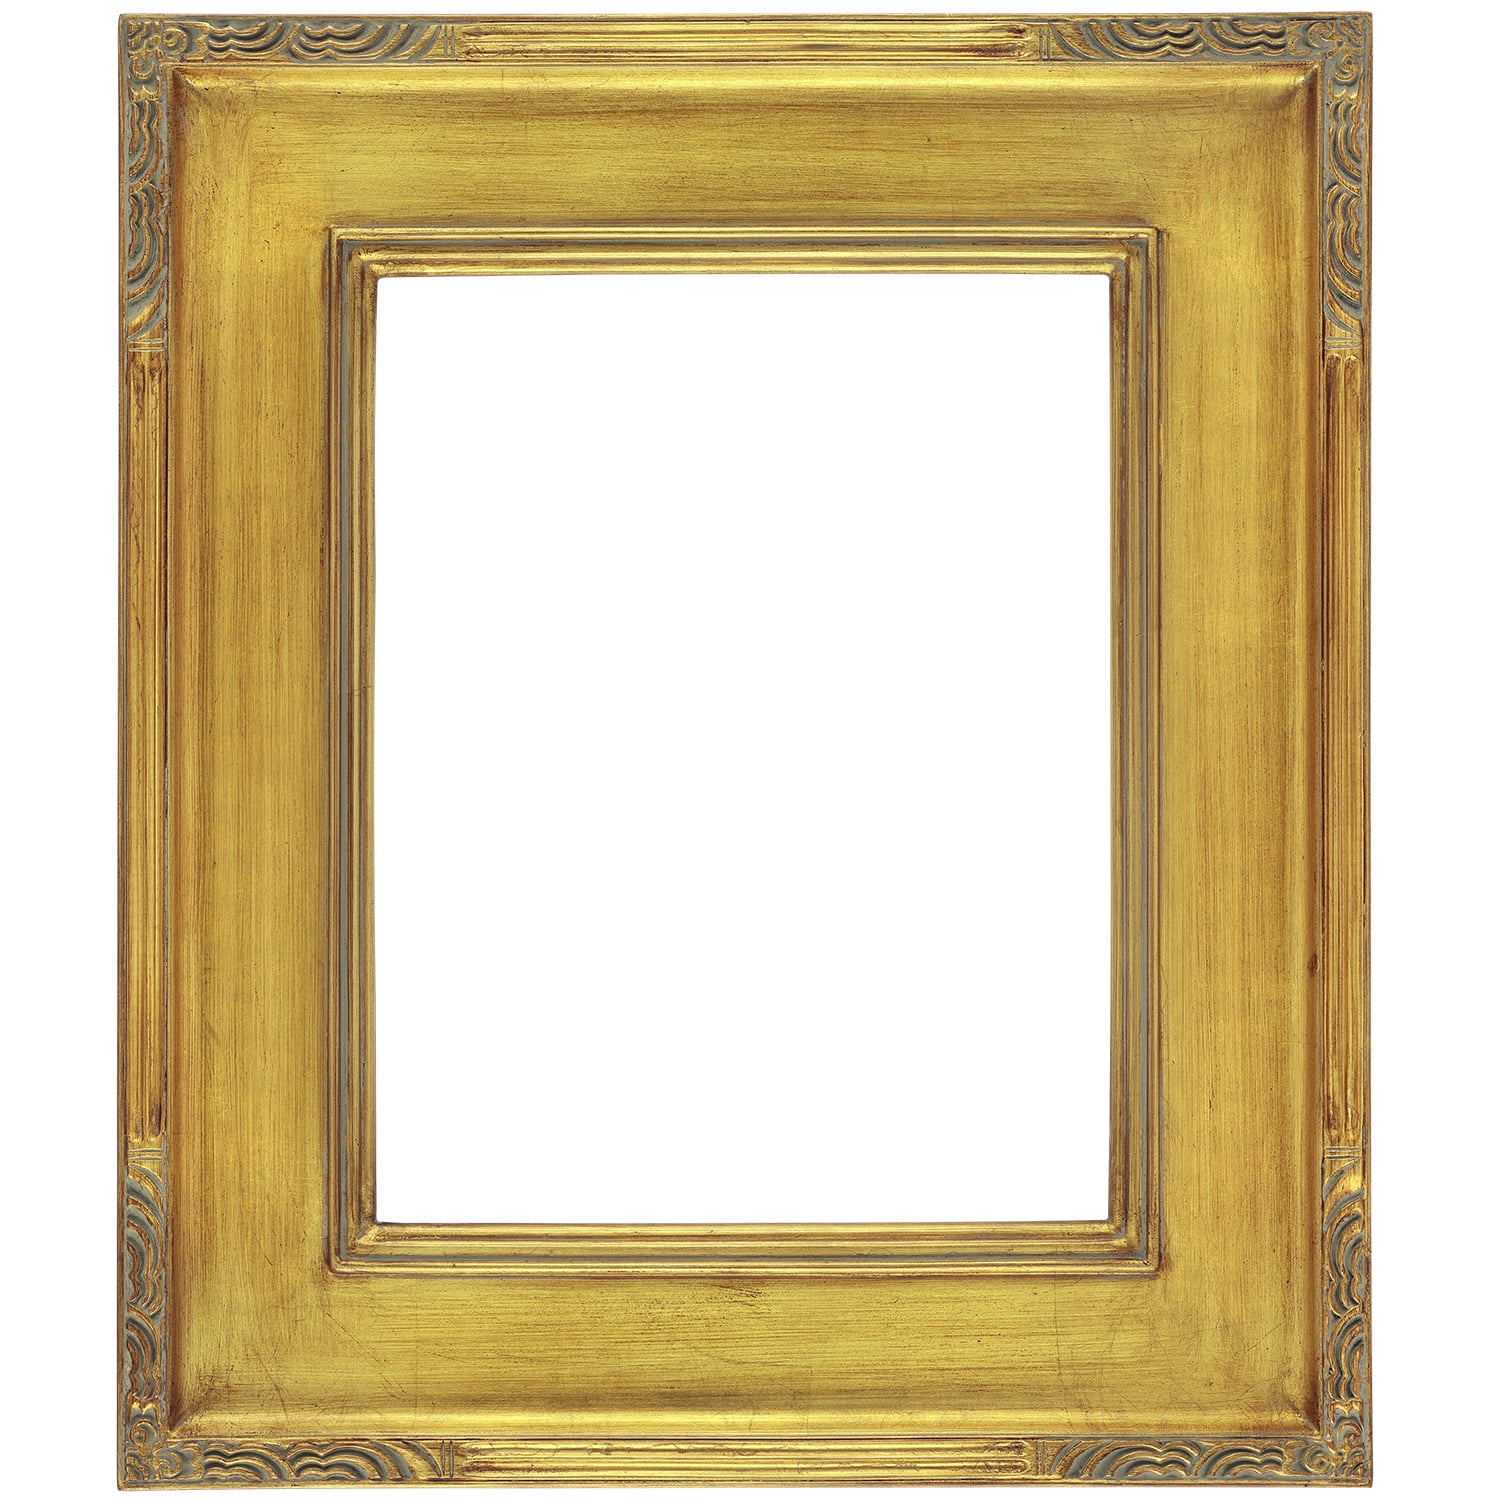  ArtToFrames 12 x 12 Inch 603 Circle Frame Antique Gold Leaf  Picture Frame Comes with Circle Flat Glass, Circle Frame Back and Wall  Hanging Hardware (603C1212AG)